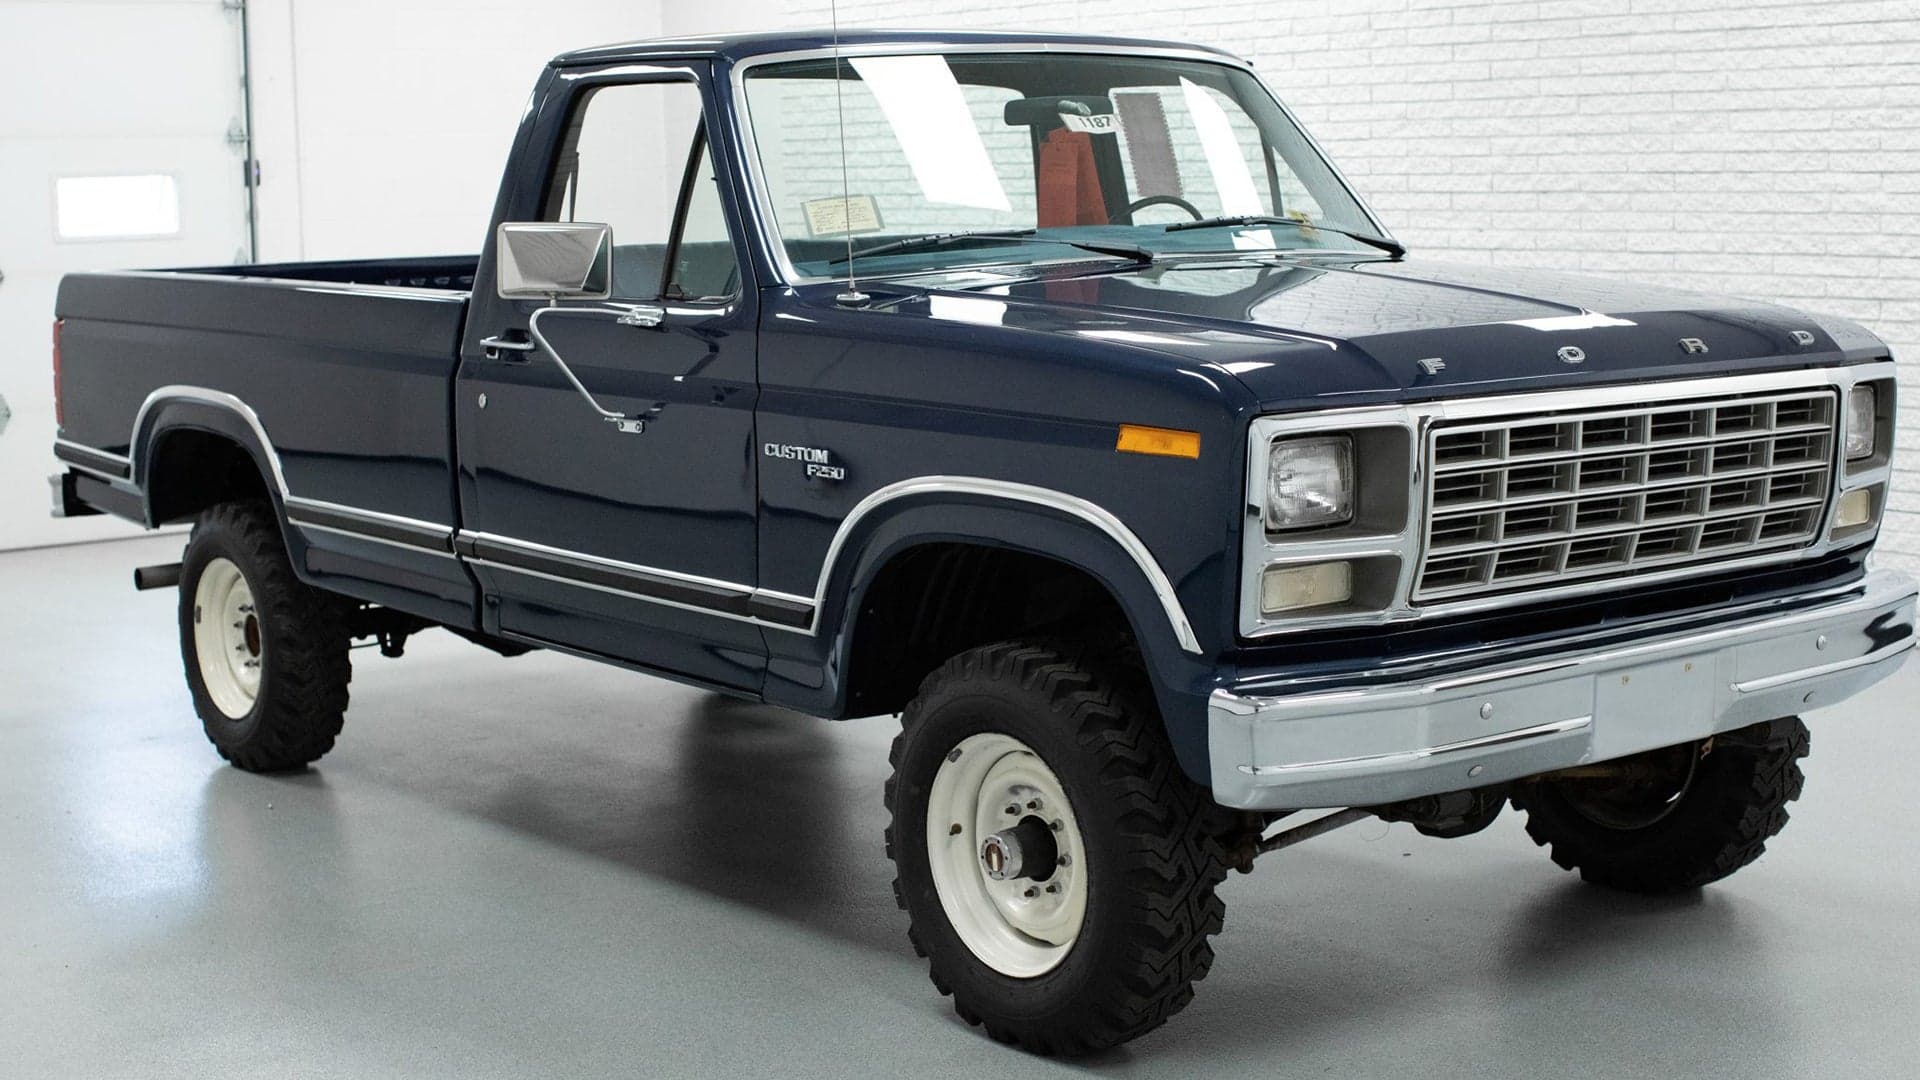 Practically New 1980 Ford F-250 Sells for an Astounding $97,000 at Auction